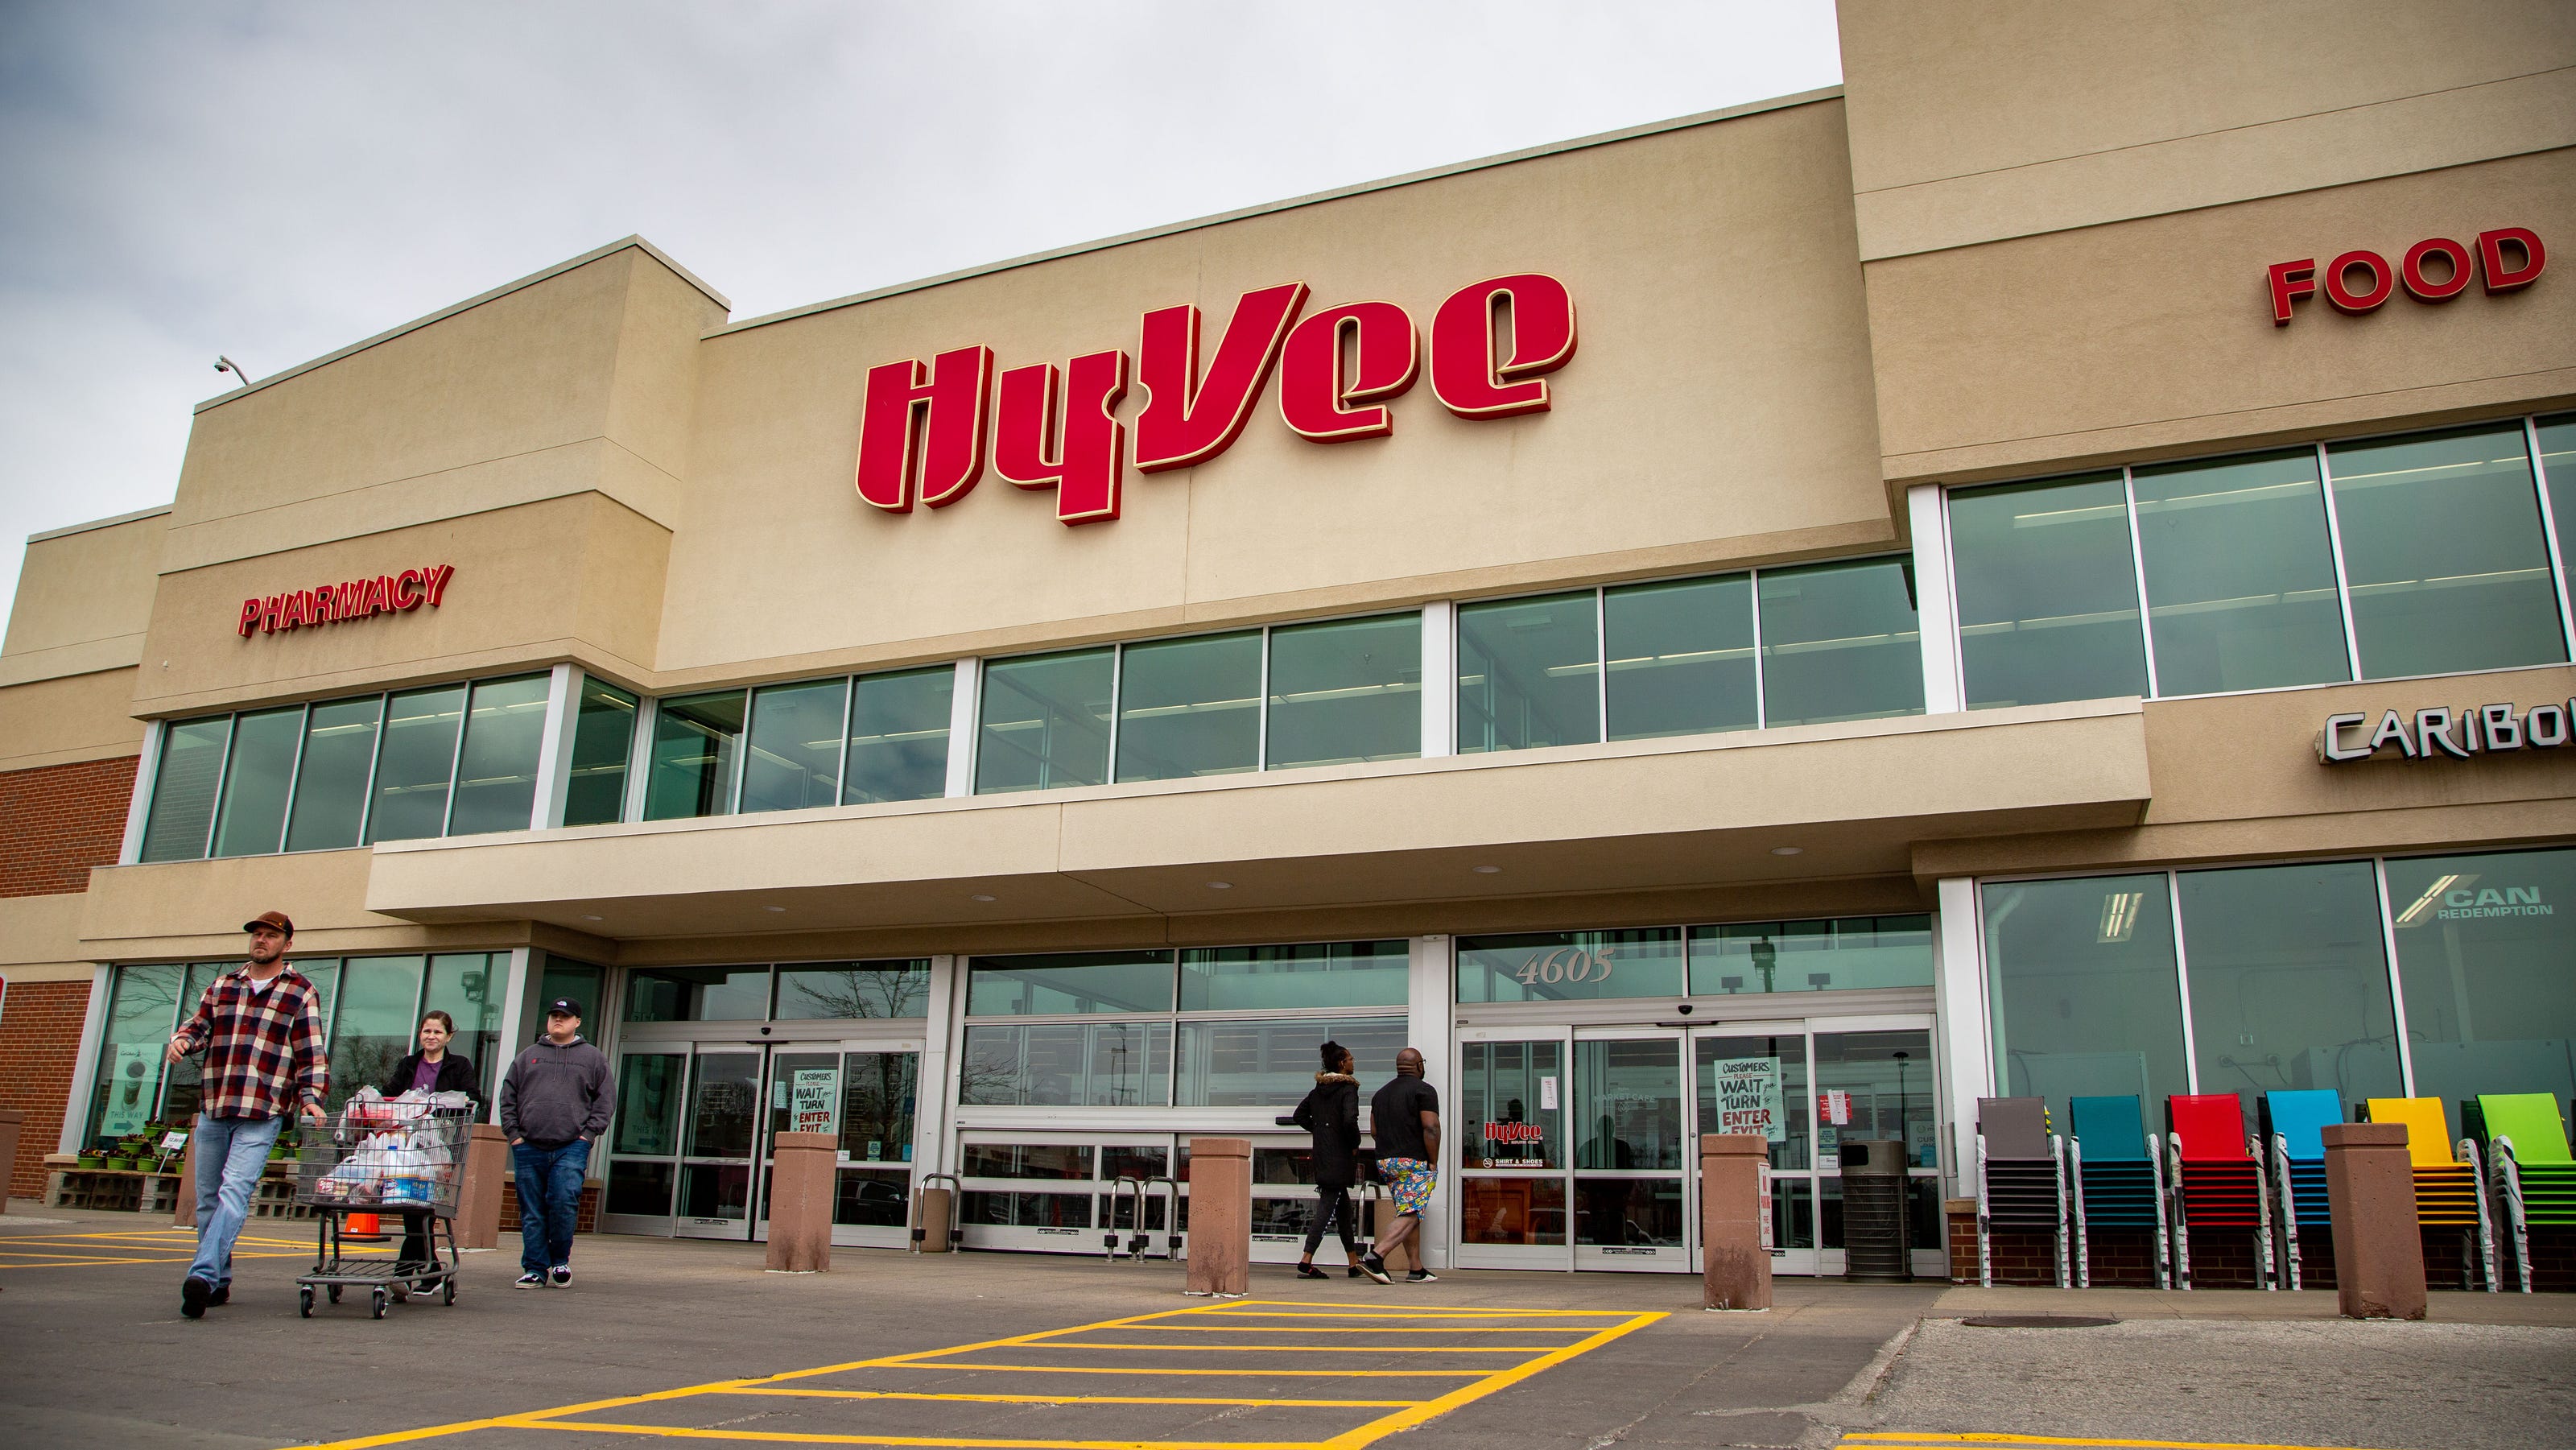 EPA orders HyVee to stop selling unregulated wipes in Kansas City stores